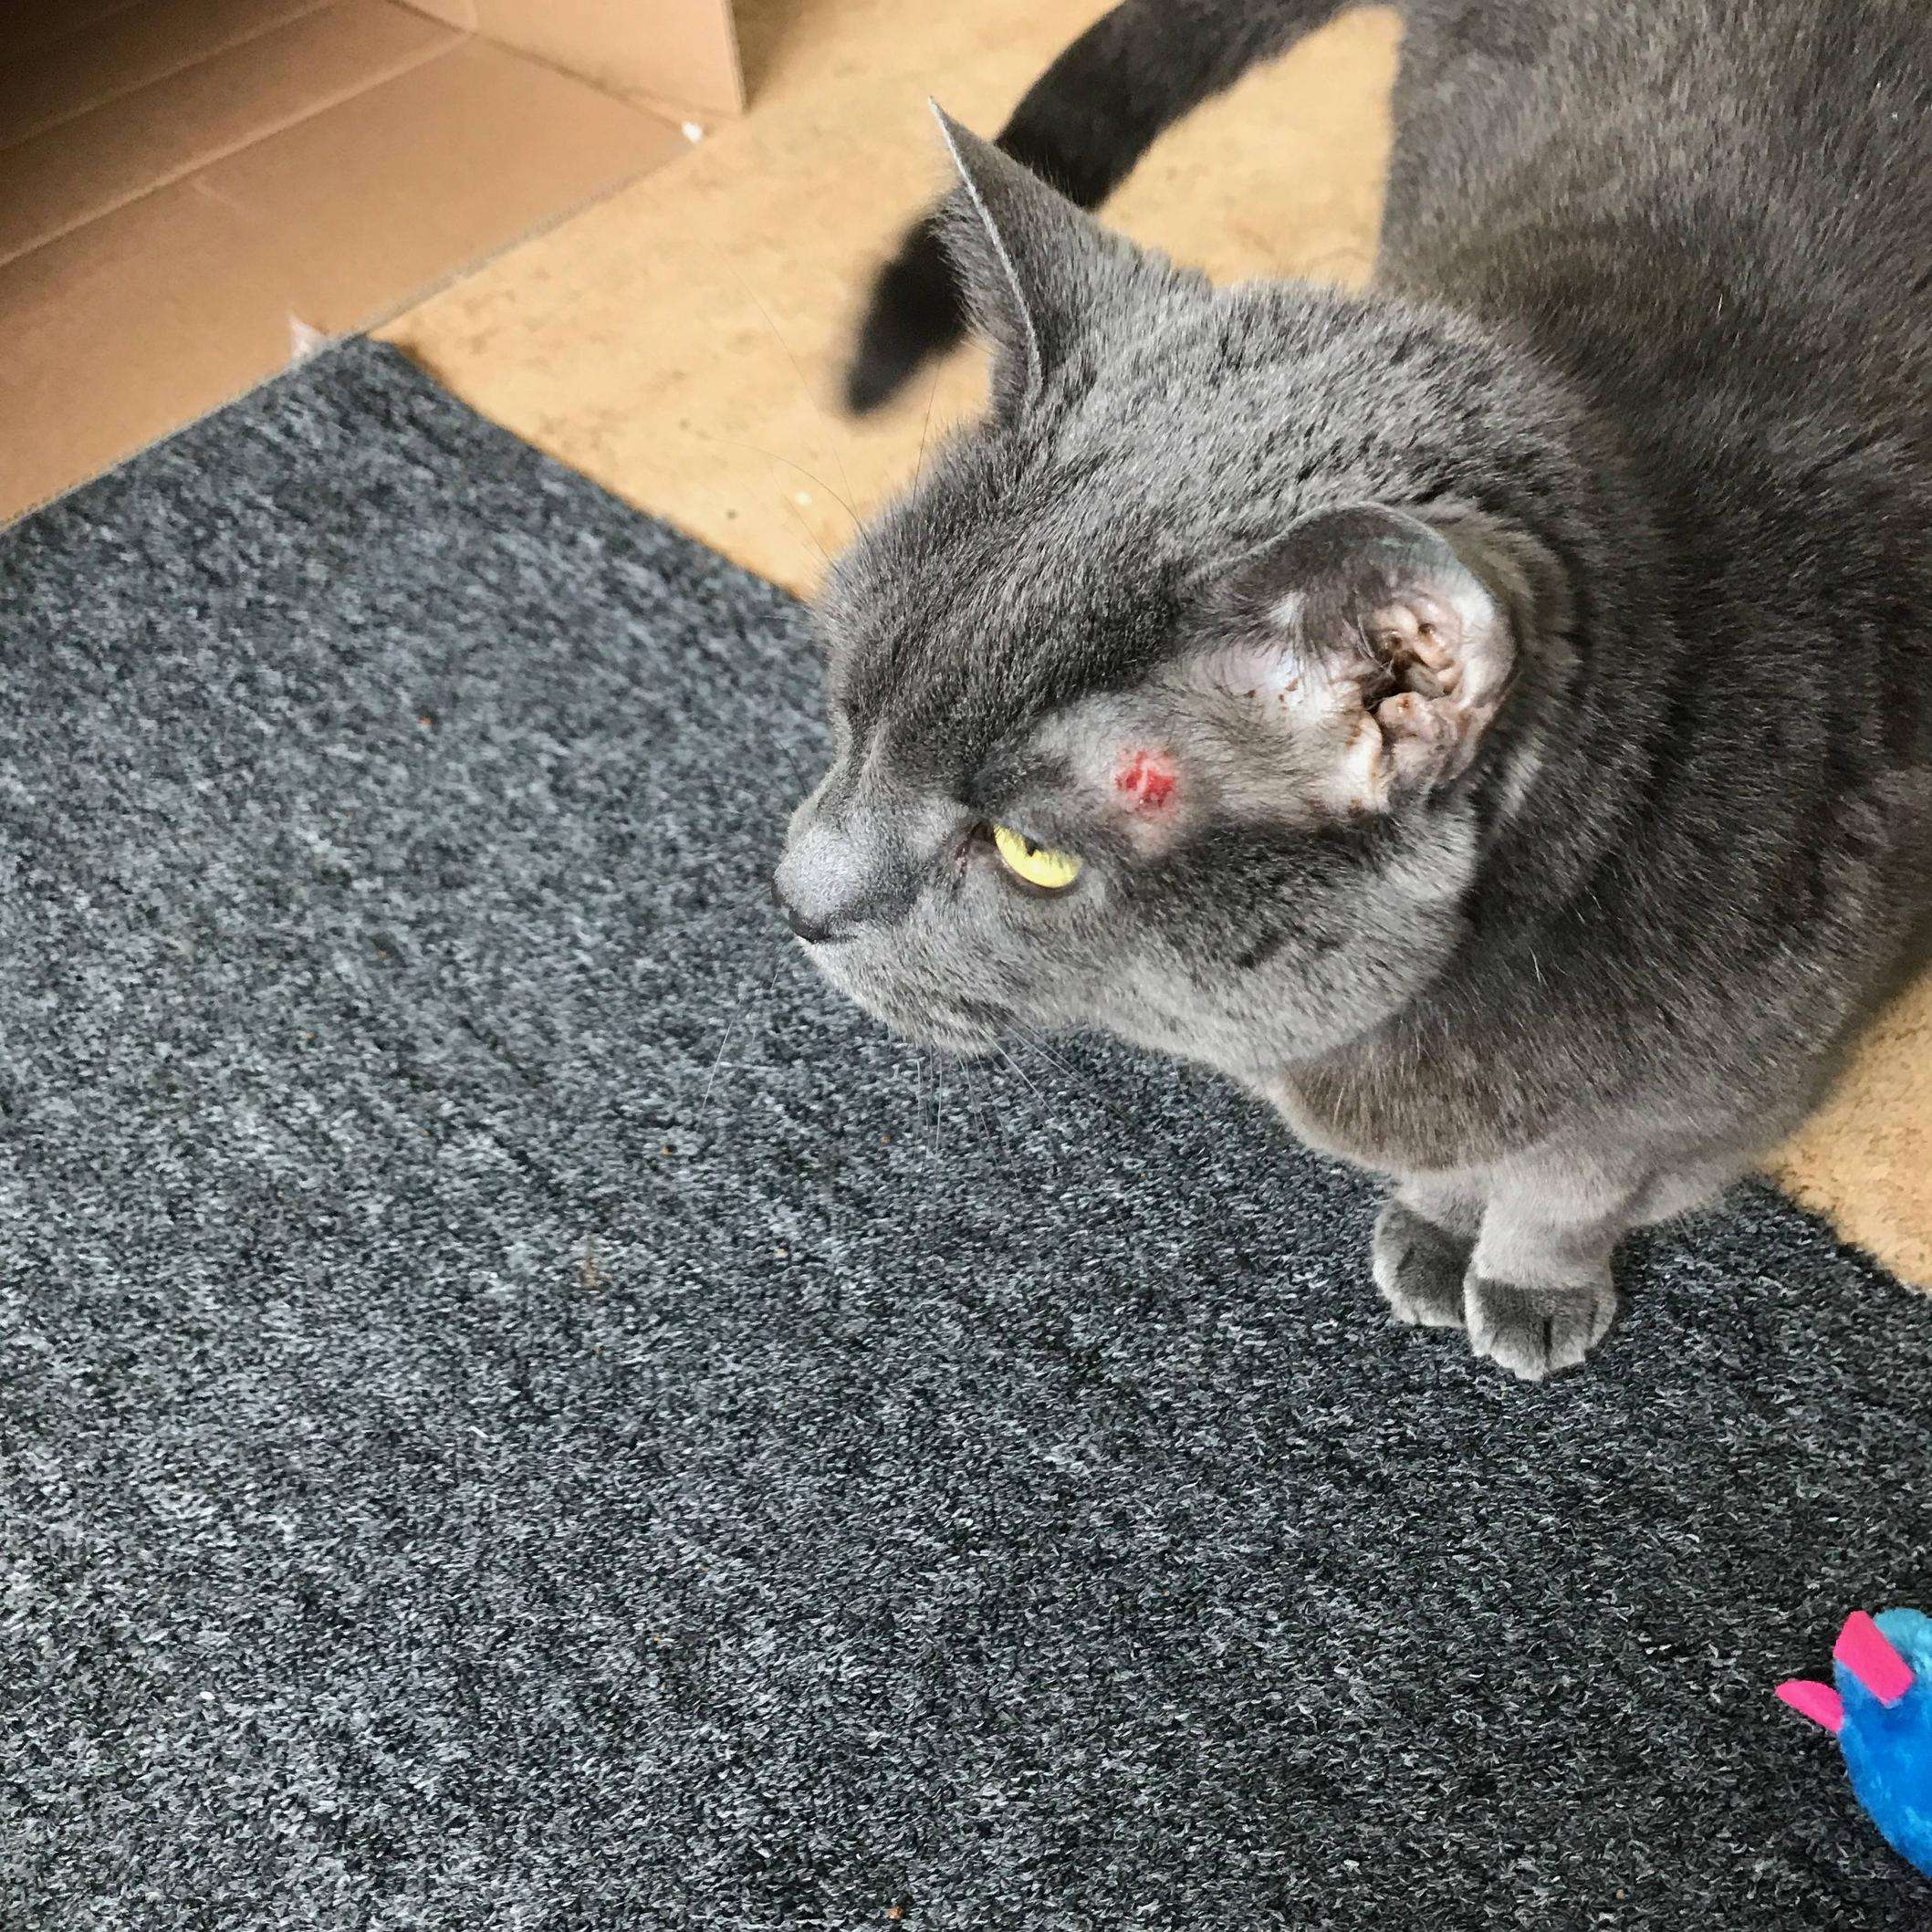 Adopted Cat Has Skin Problems, Can I Get Some Input ...